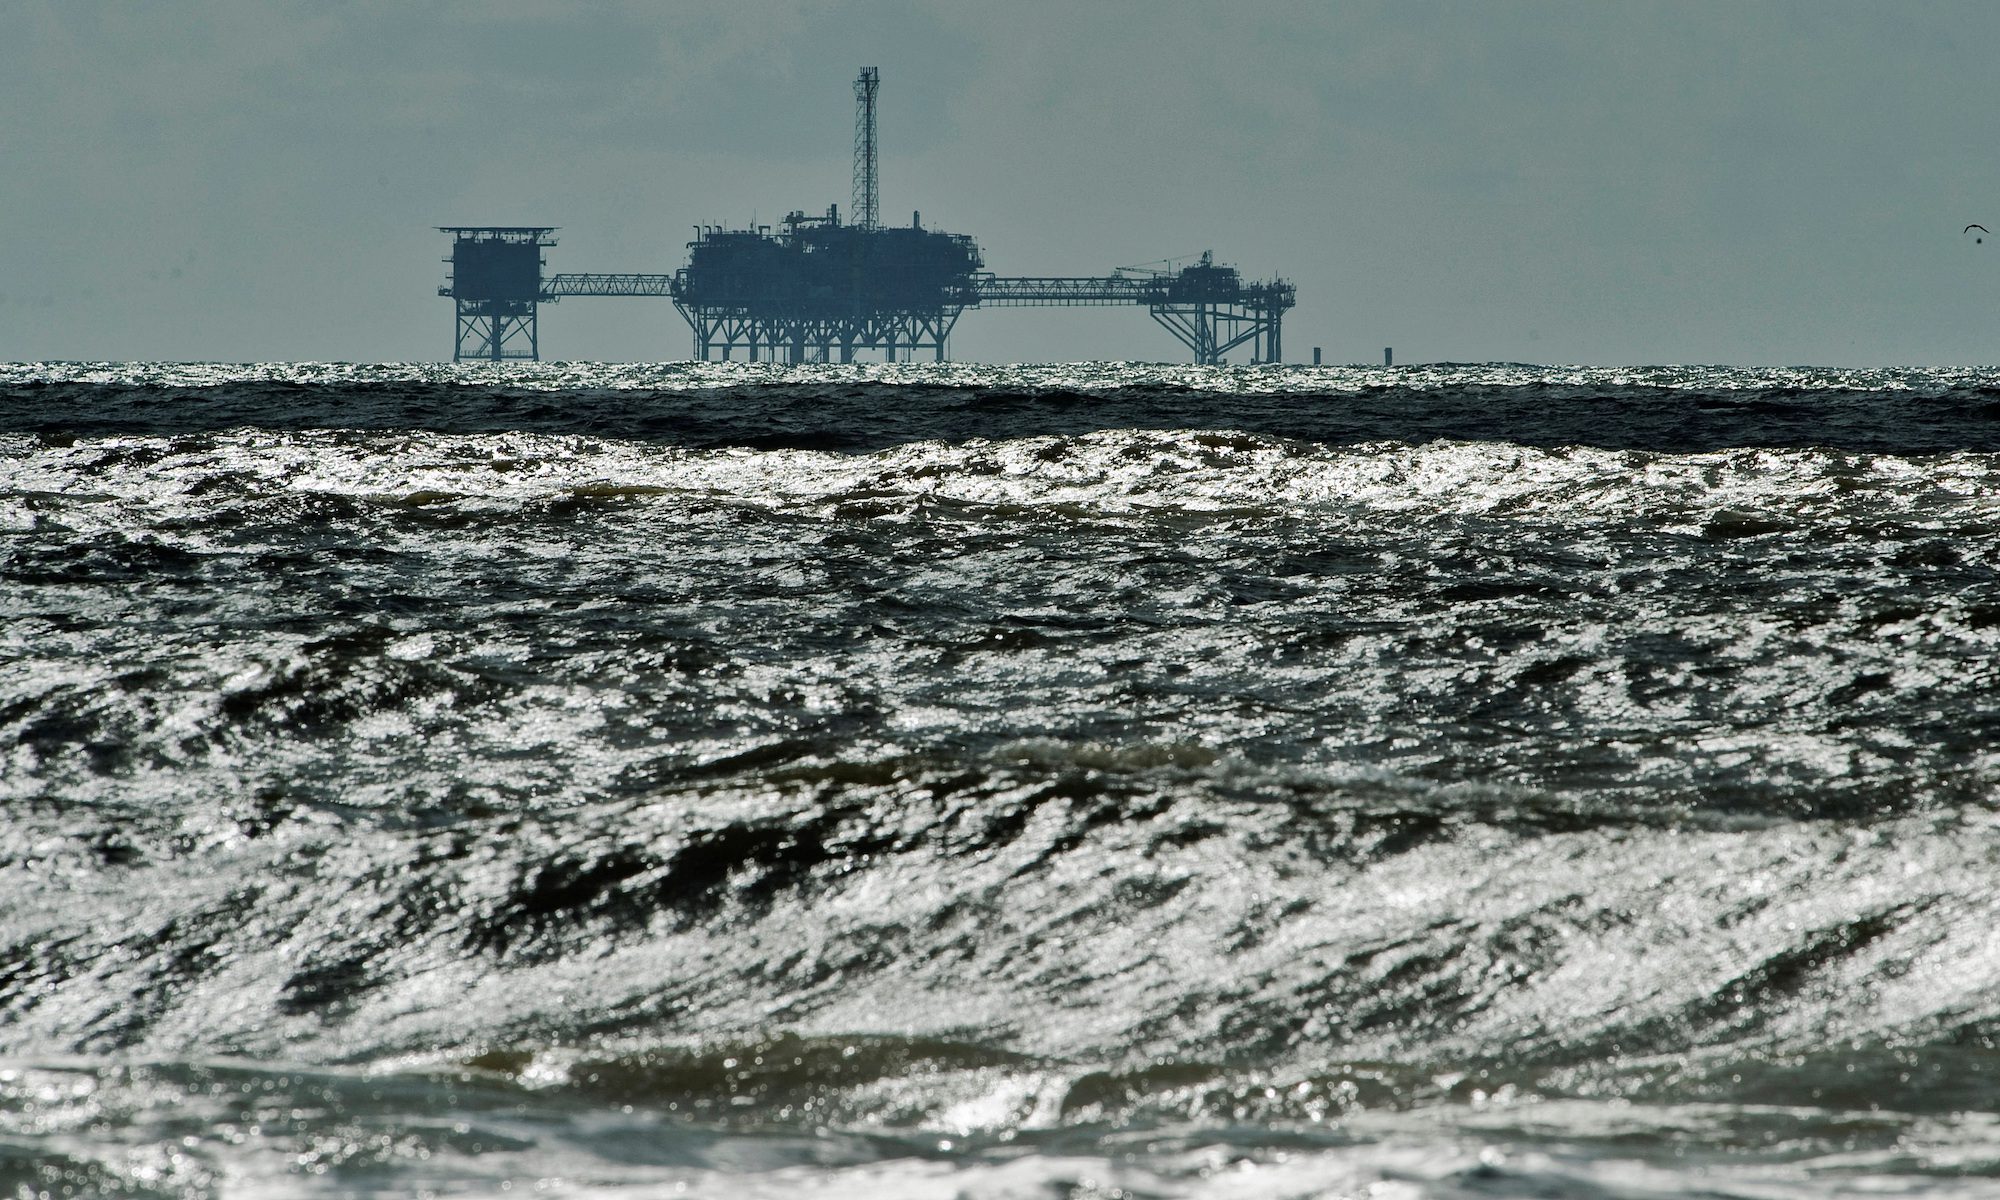 Chevron Most Active While Exxon Eyes Carbon Storage in Gulf of Mexico Auction